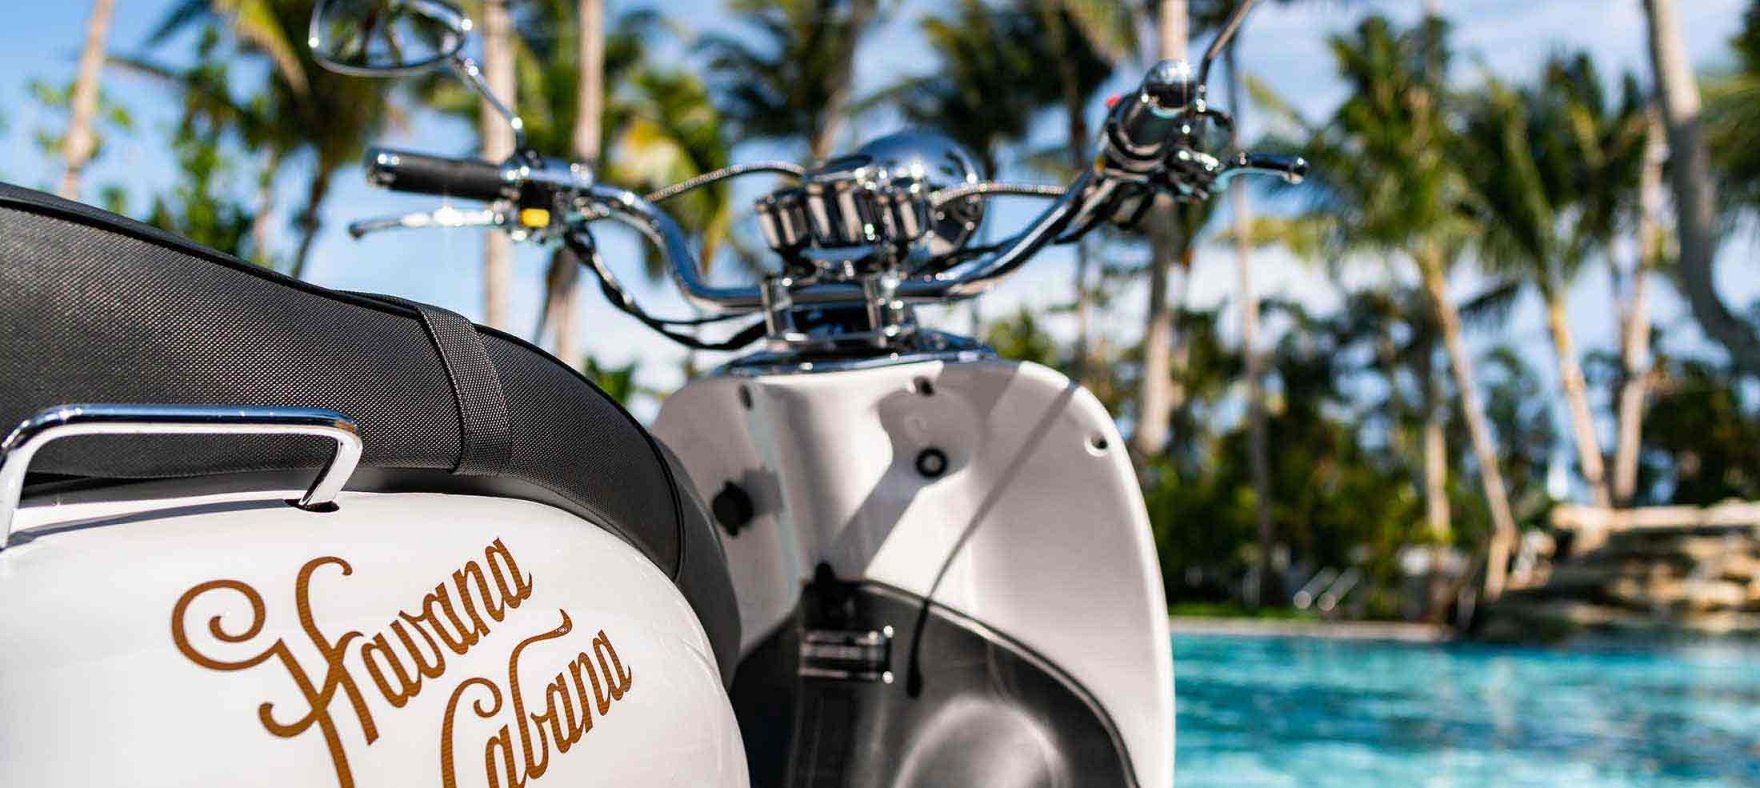 A close up of the Havana Cabano logo placed on the Vespa parked next to the outdoor pool